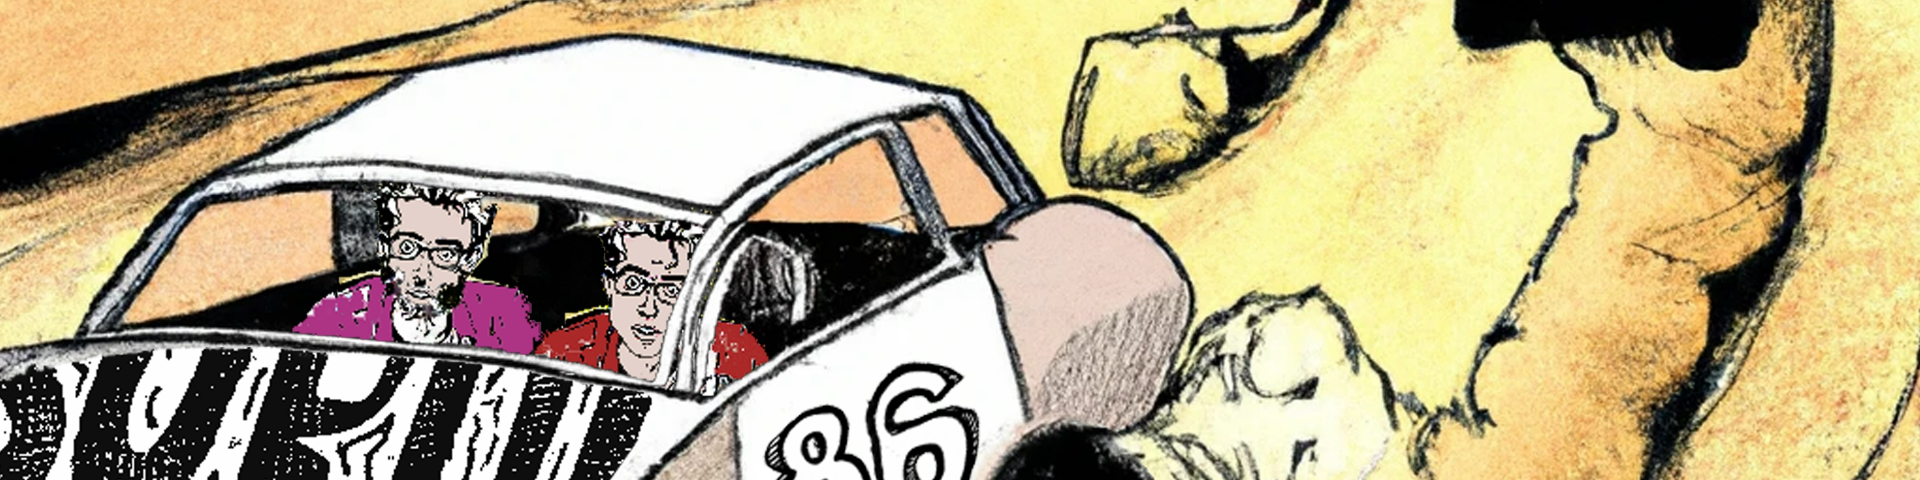 A close up the Drag Car Racer EP album cover by Scrub. A newspaper cartoon-styled Luke and Corey have panicked expressions while racing a derby car through the desert.